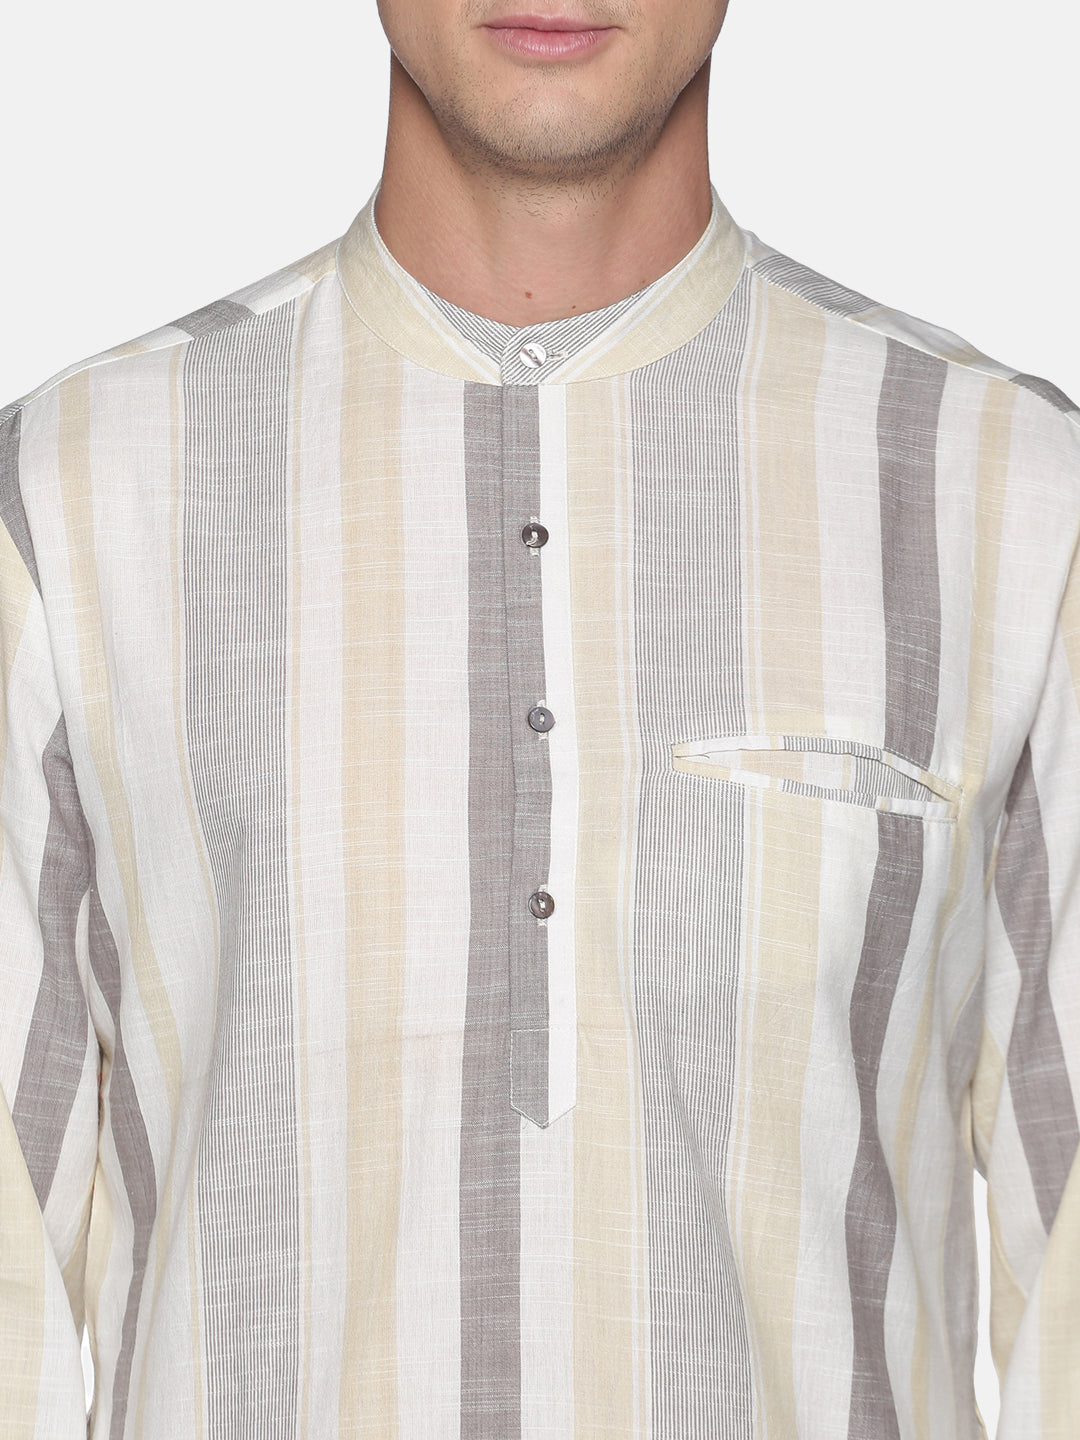 Off white striped kurta with front and both side pockets